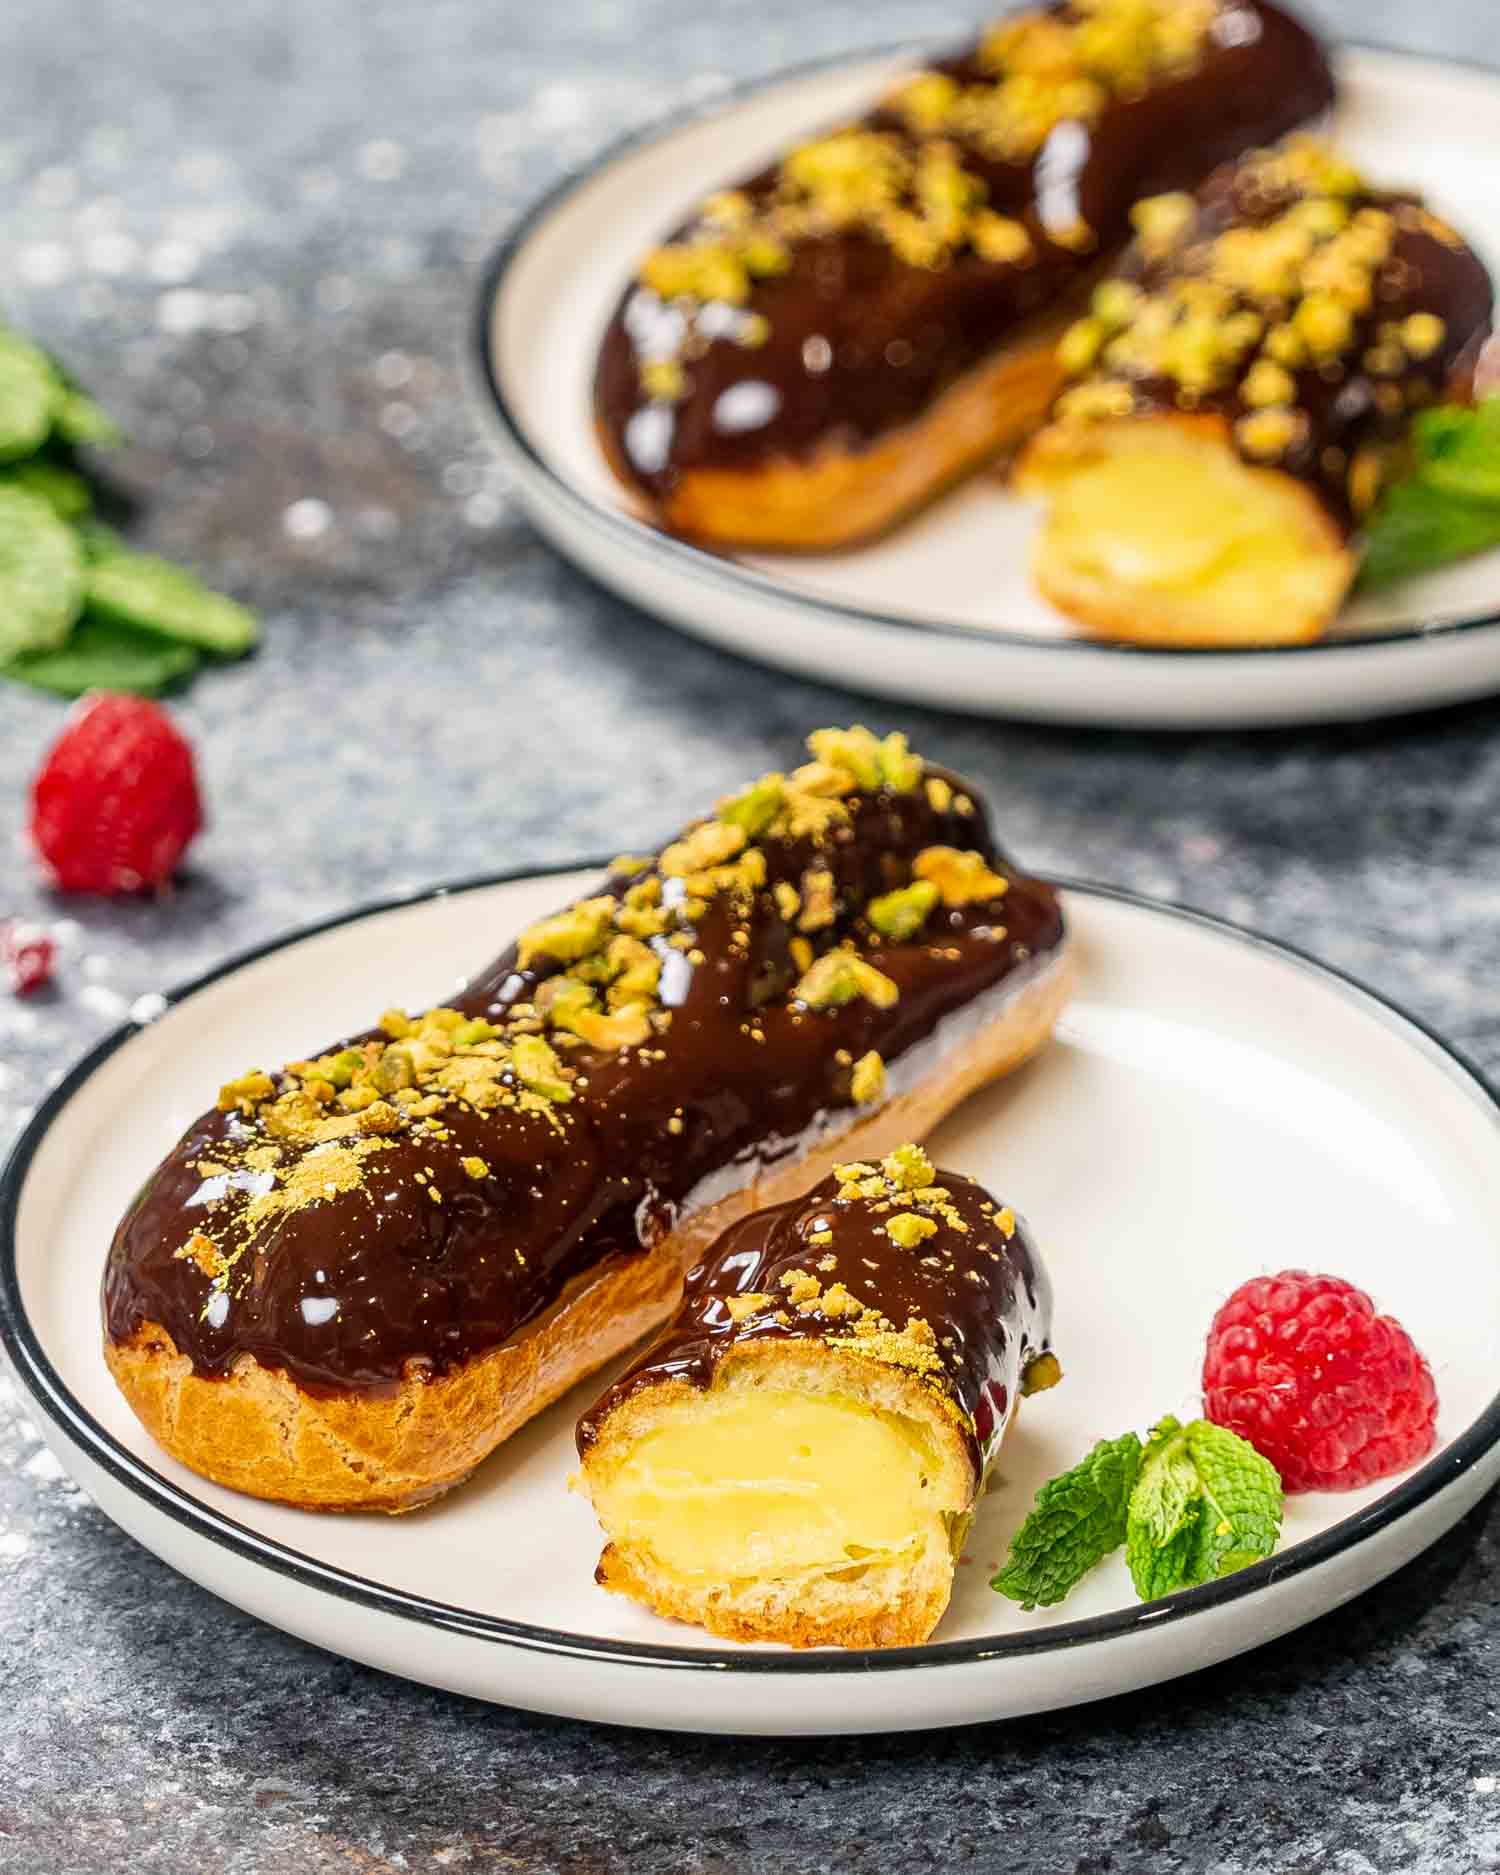 an eclair filled with pastry cream and dipped in chocolate and topped with pistachios.